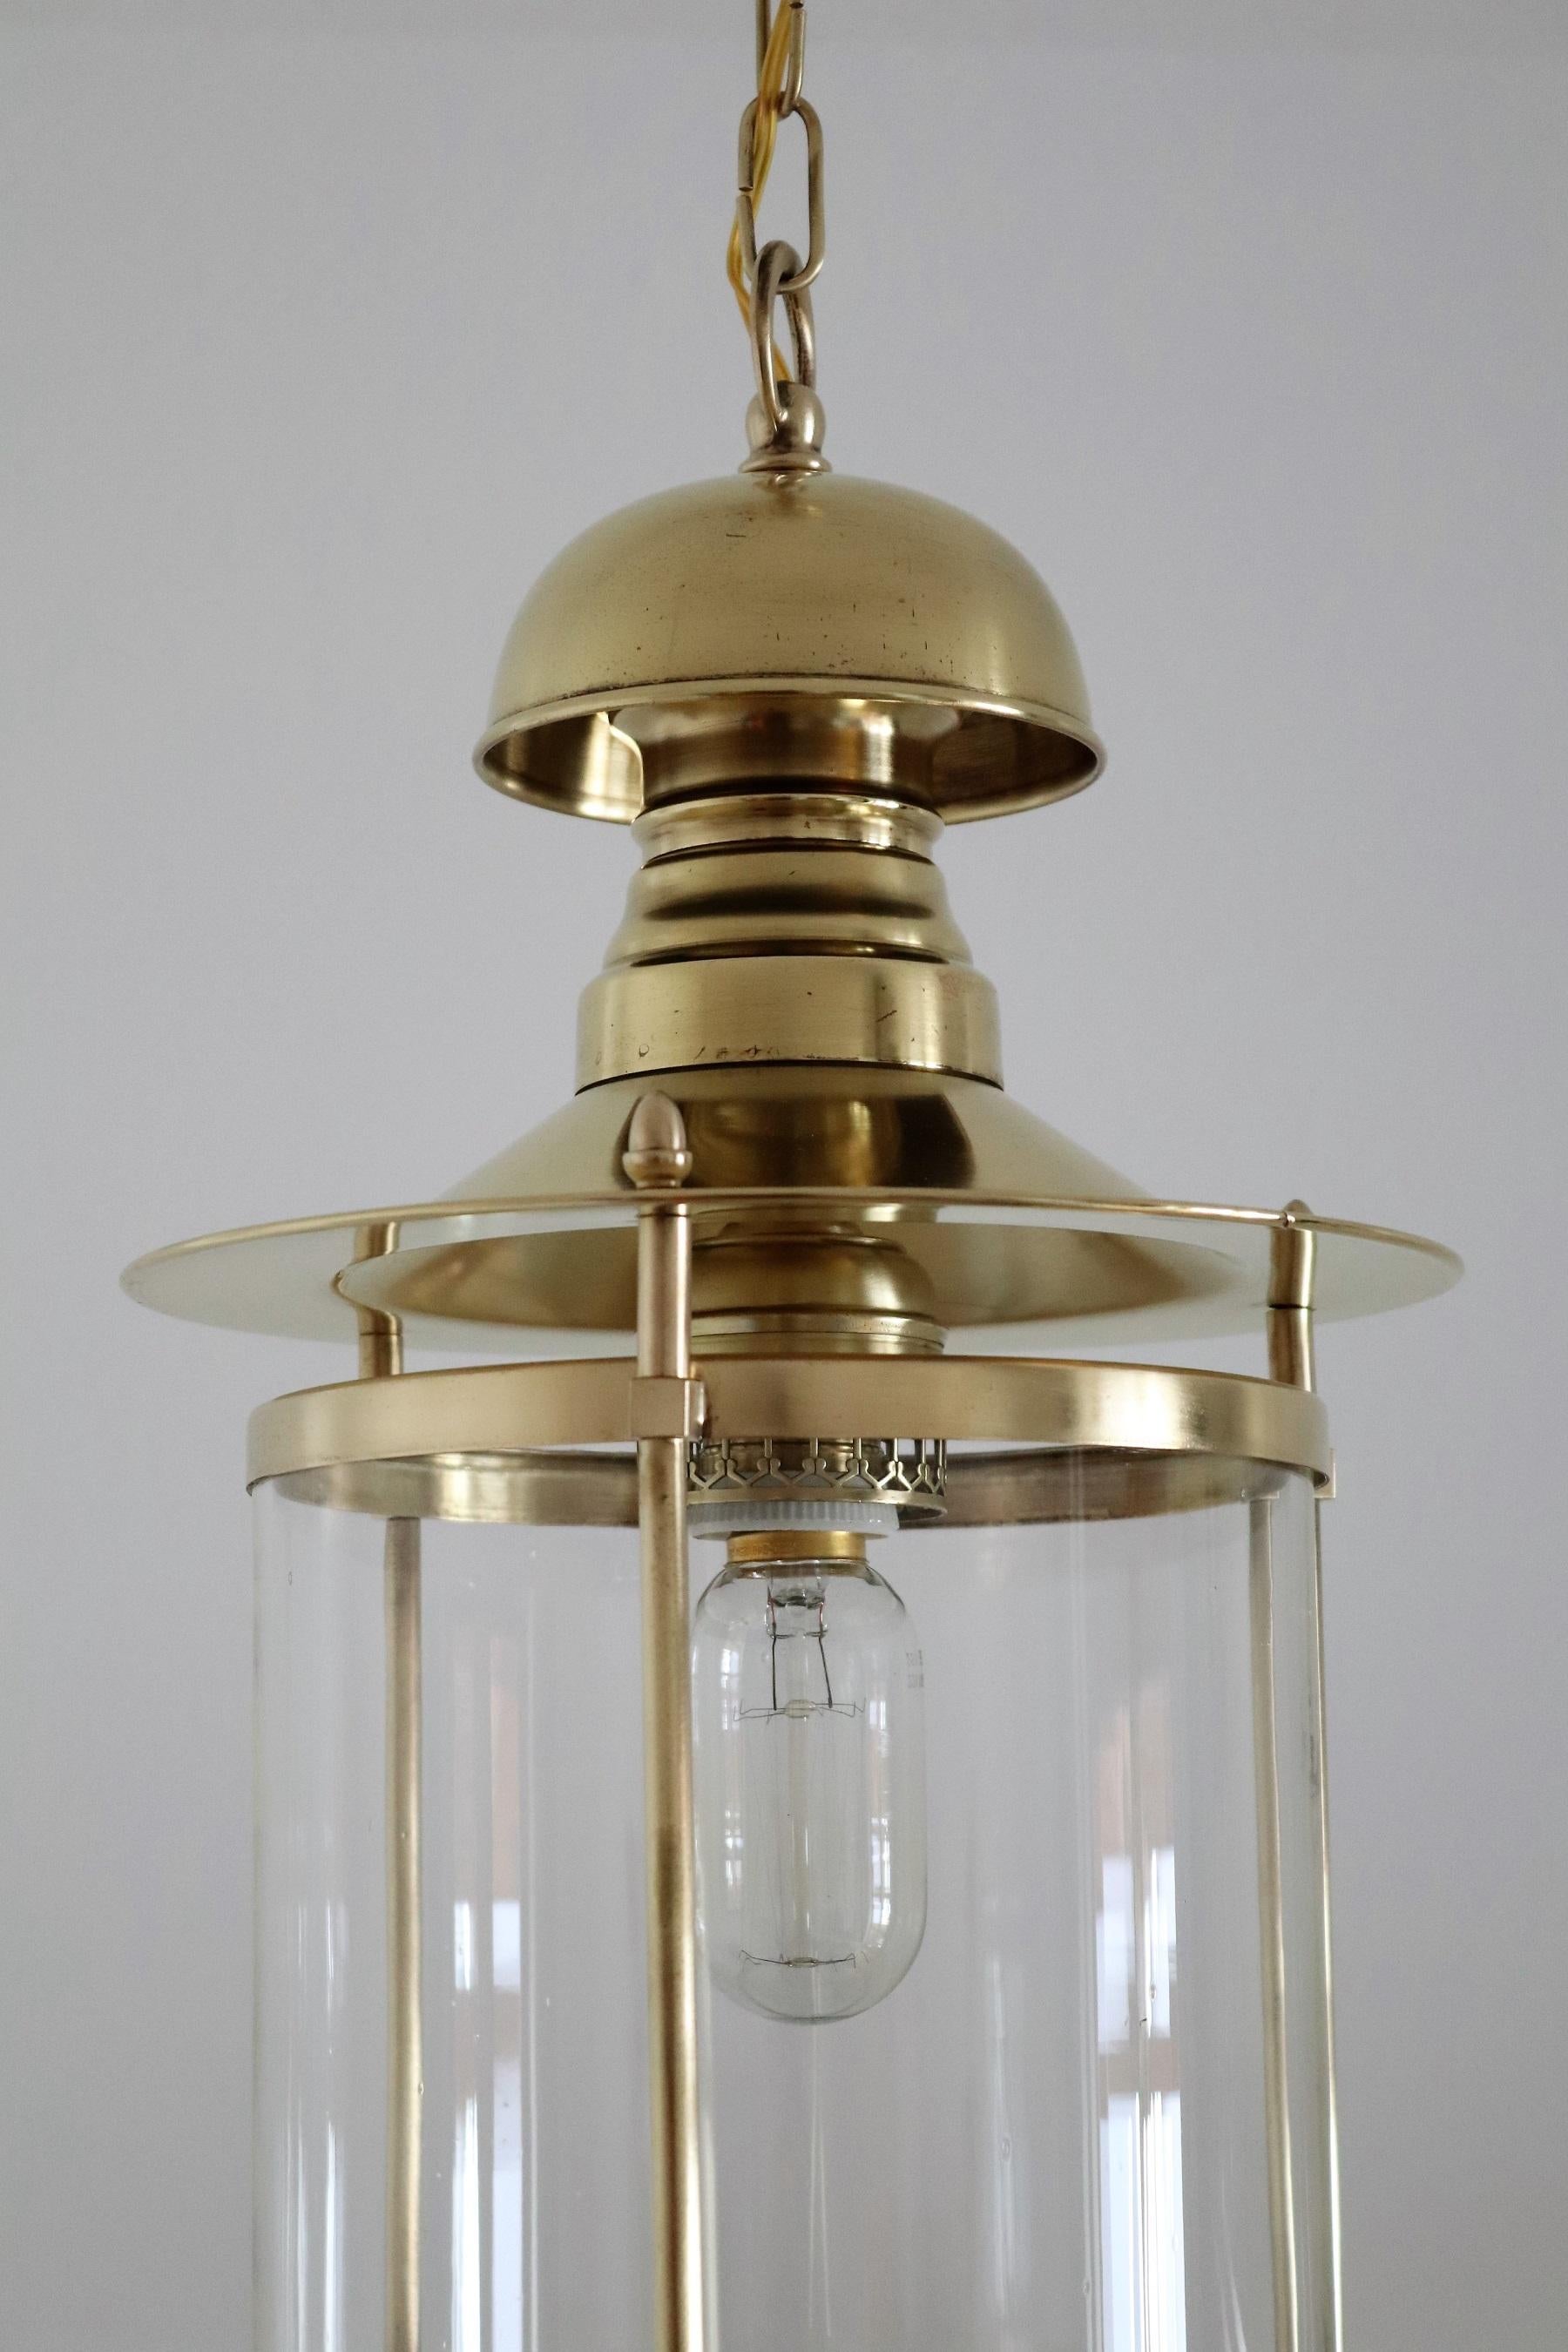 Italian Midcentury Brass and Glass Pendant Lamp or Lantern, 1970s For Sale 8